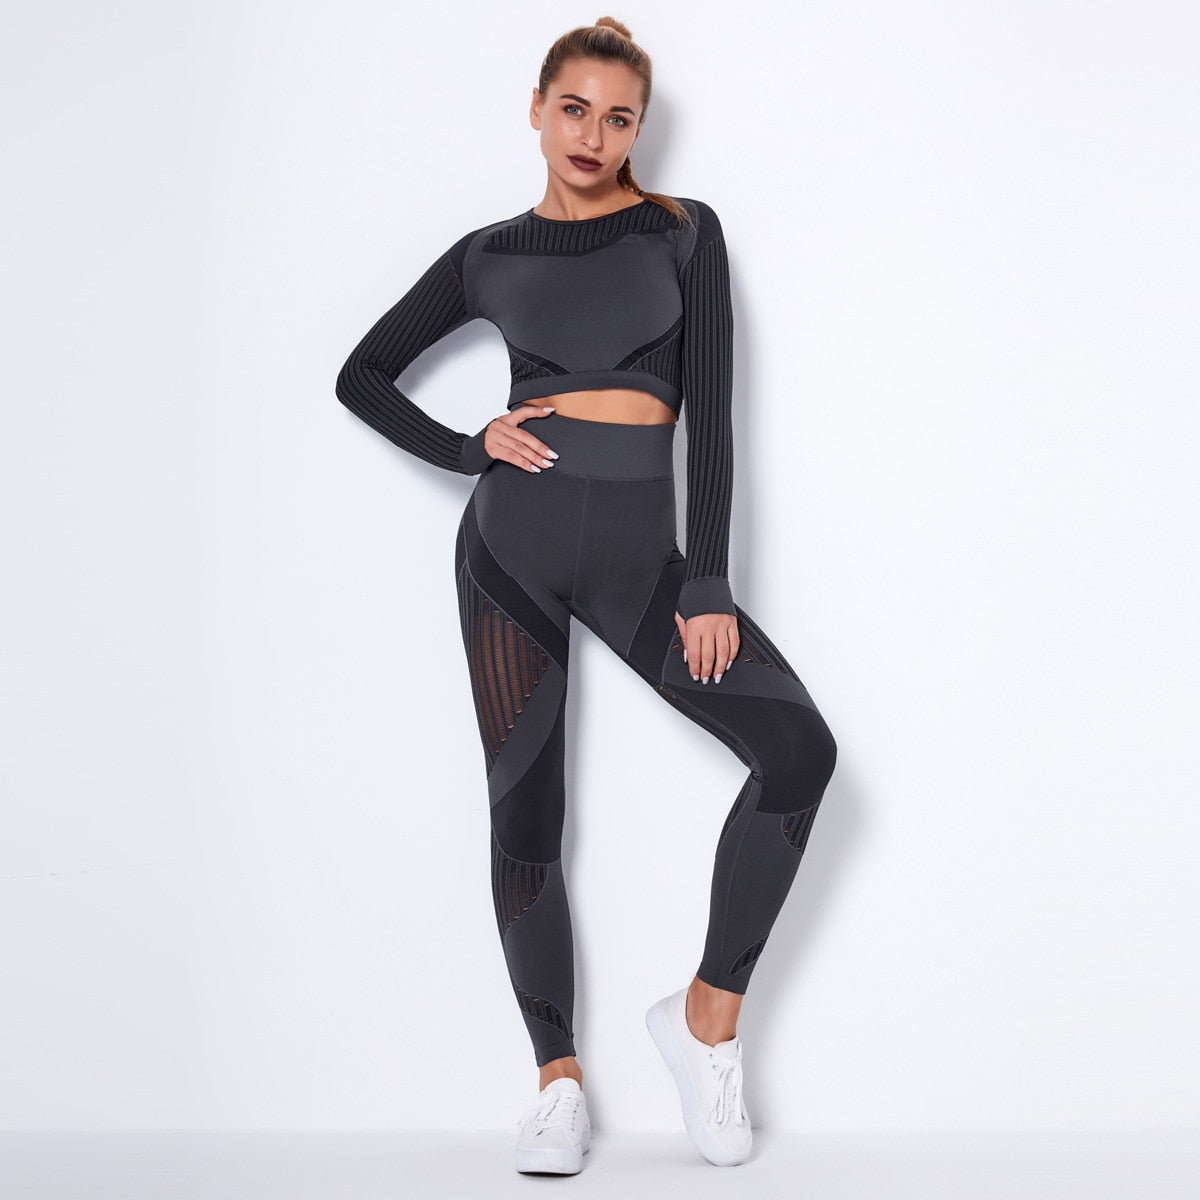 Workout Sets For Women 2 Piece Seamless Yoga Outfit Tracksuit High Waisted Yoga Leggings And Crop Top Gym Clothes Set